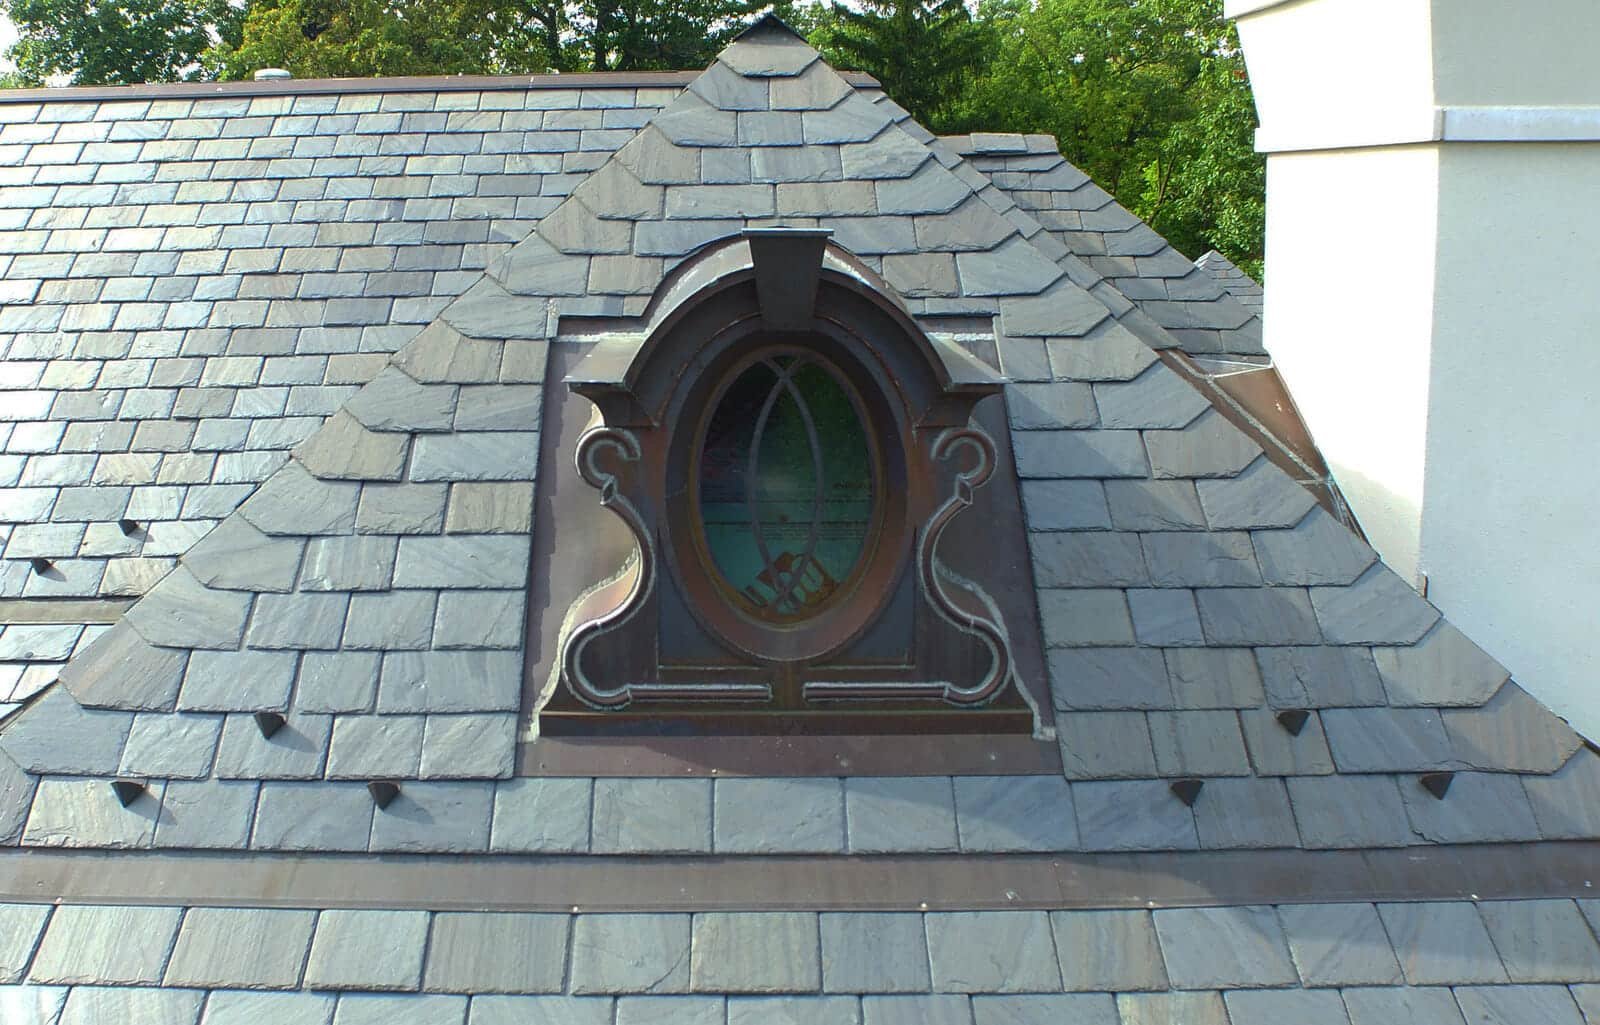 Slate roofs can last up to 150 years